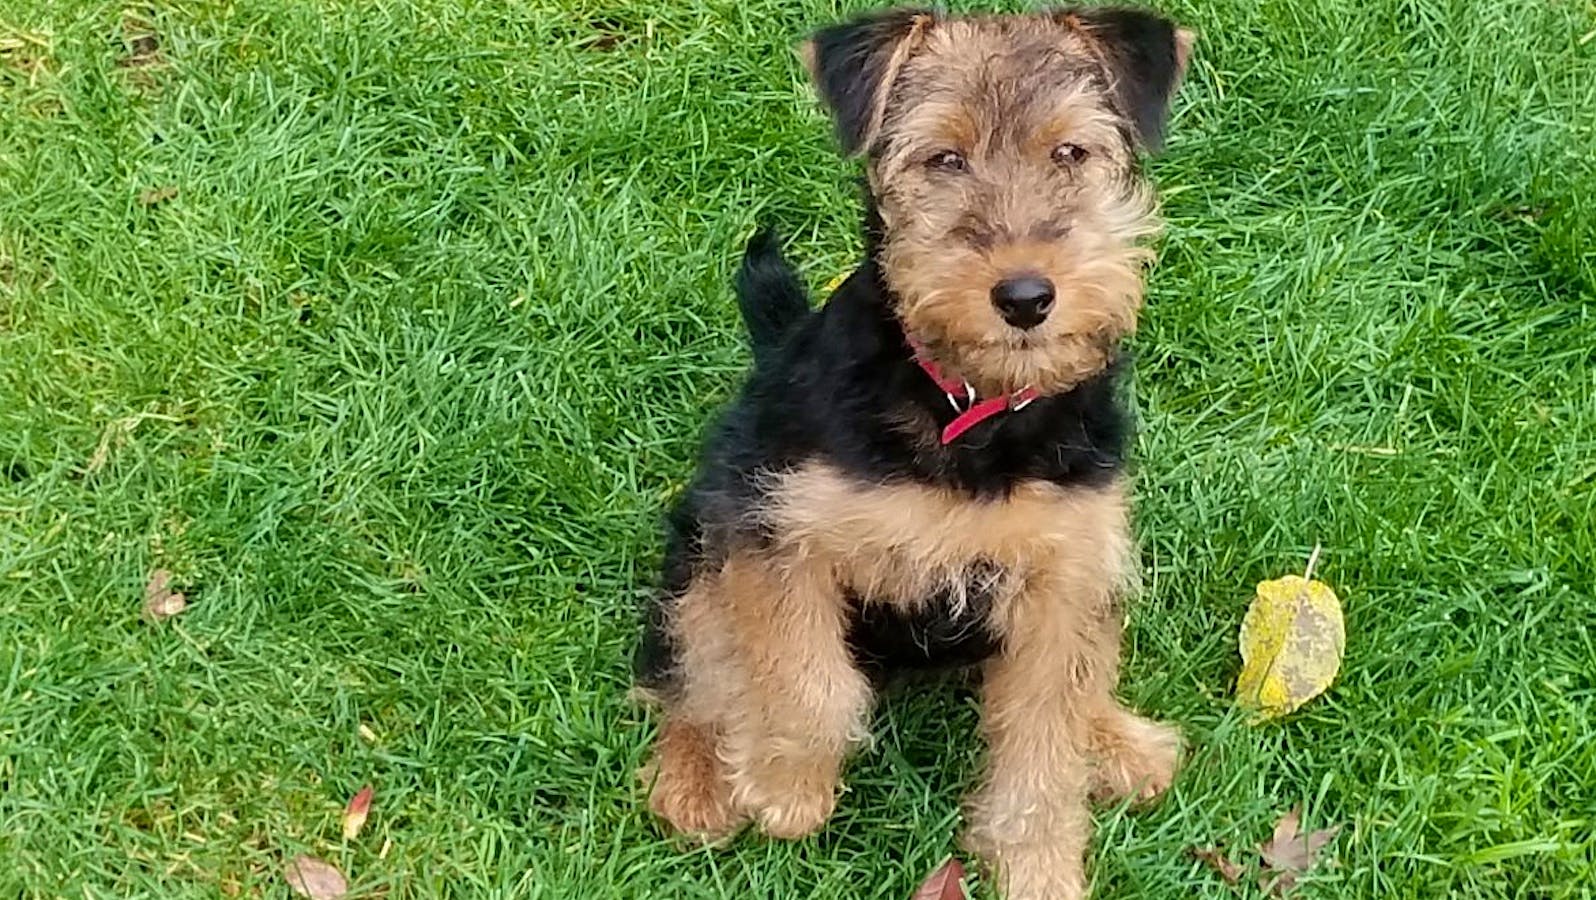 Roz the Welsh Terrier